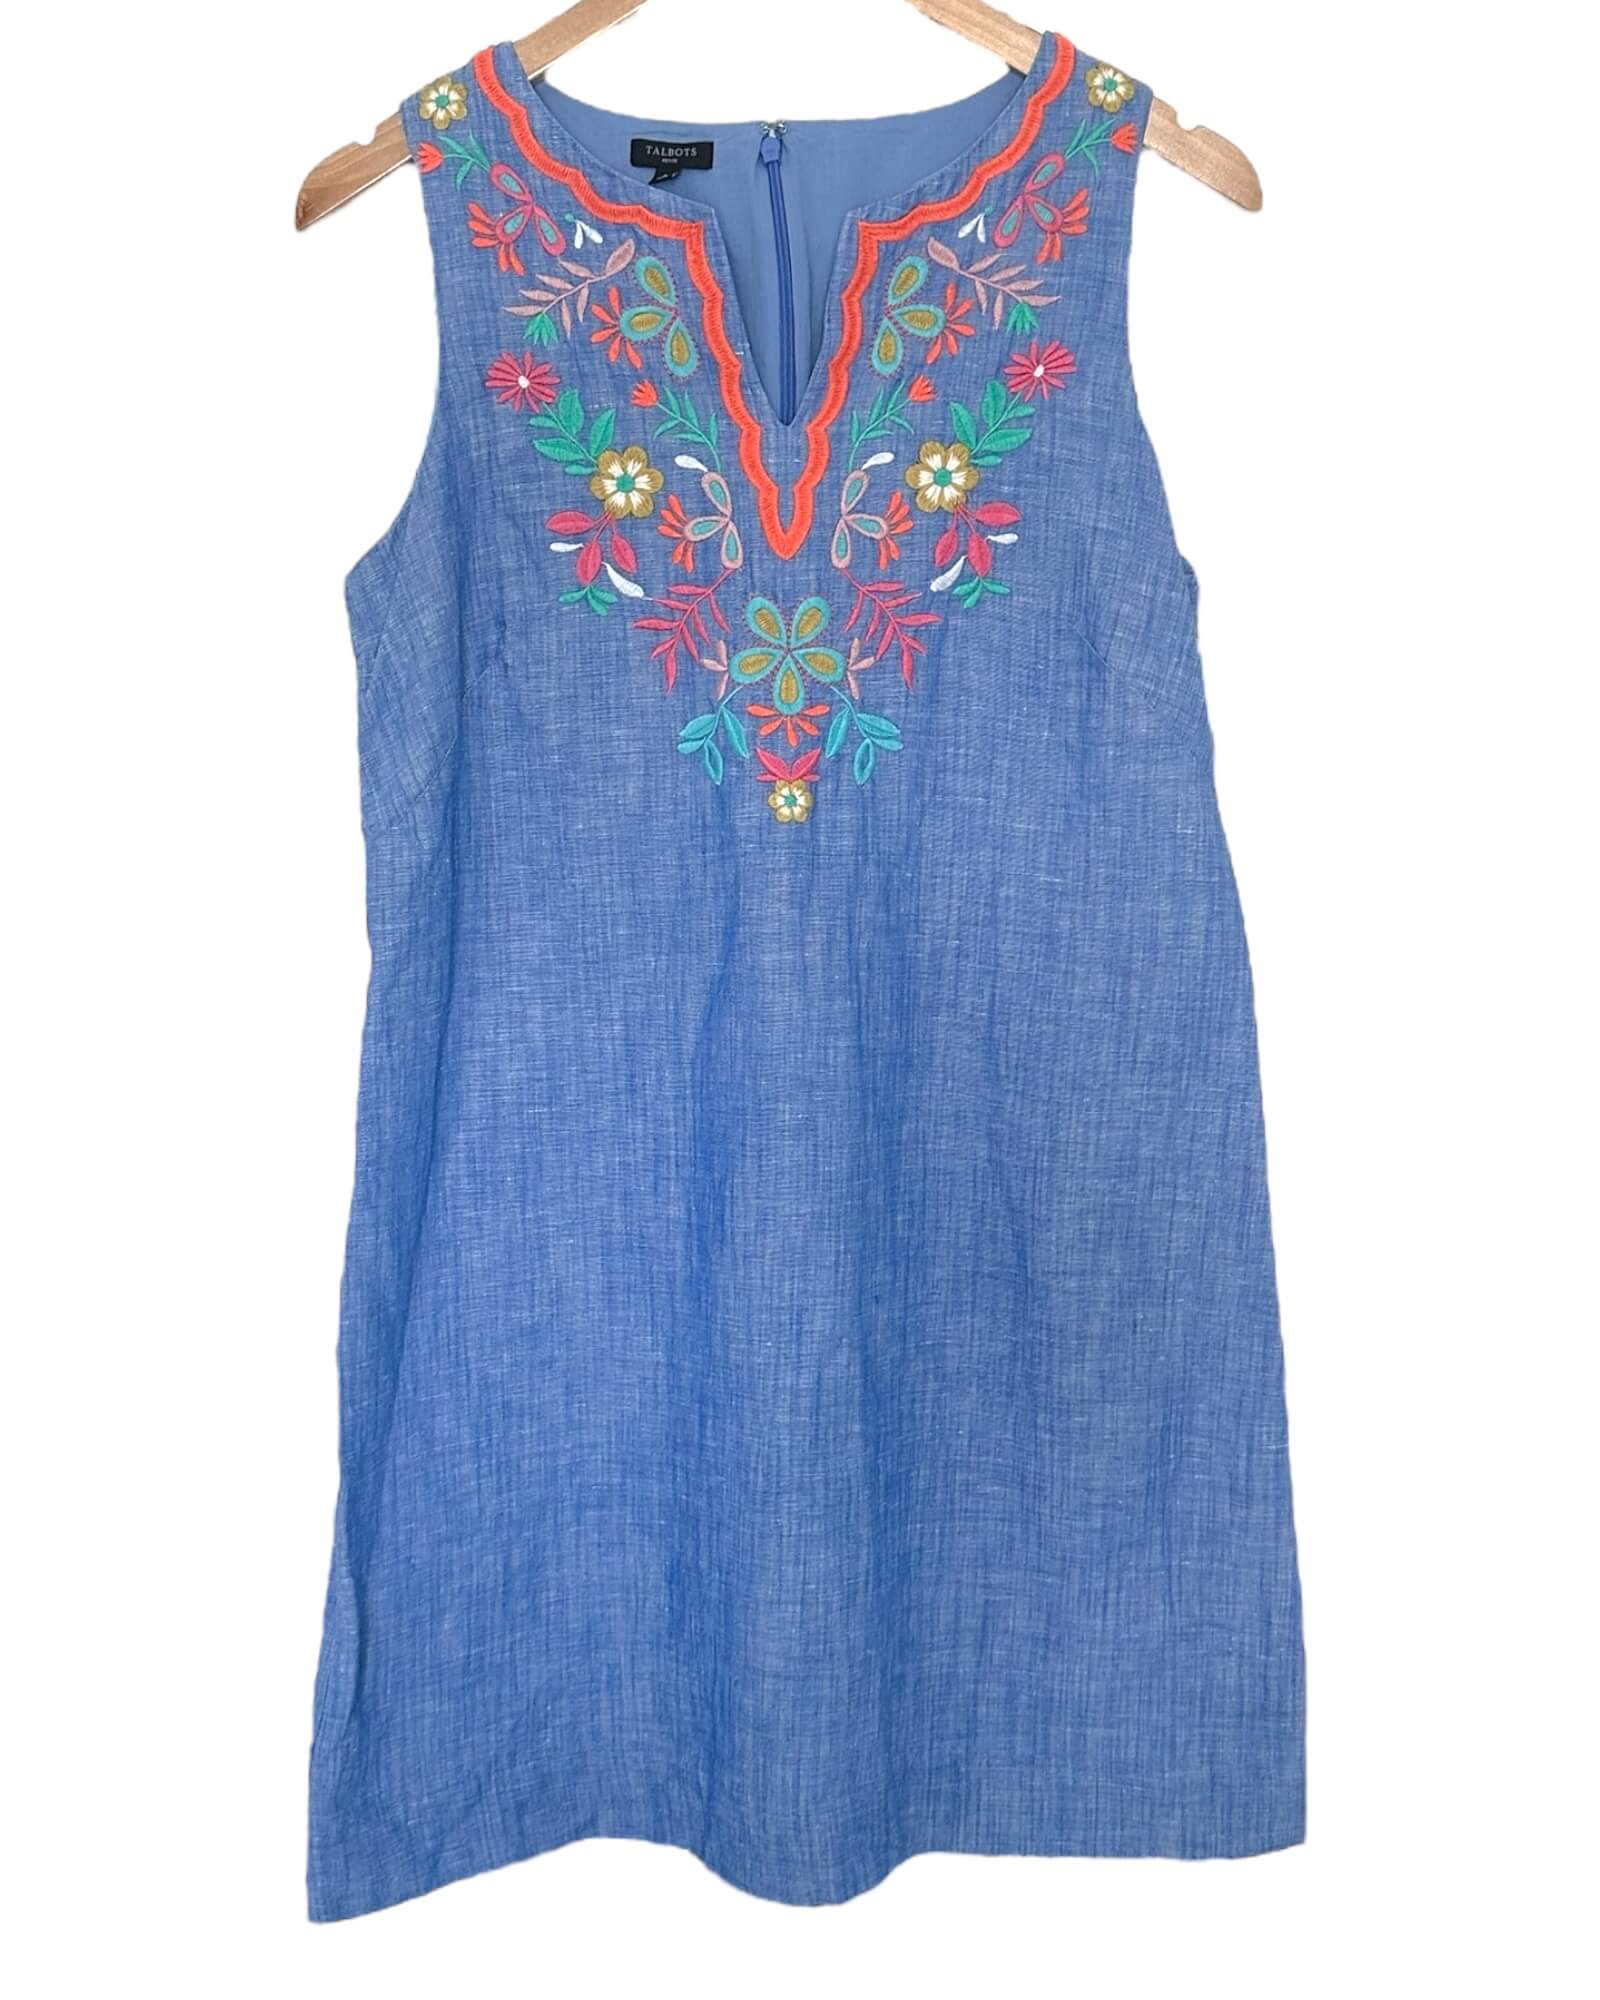 Light Spring TALBOTS chambray floral embroidered linen shift dress